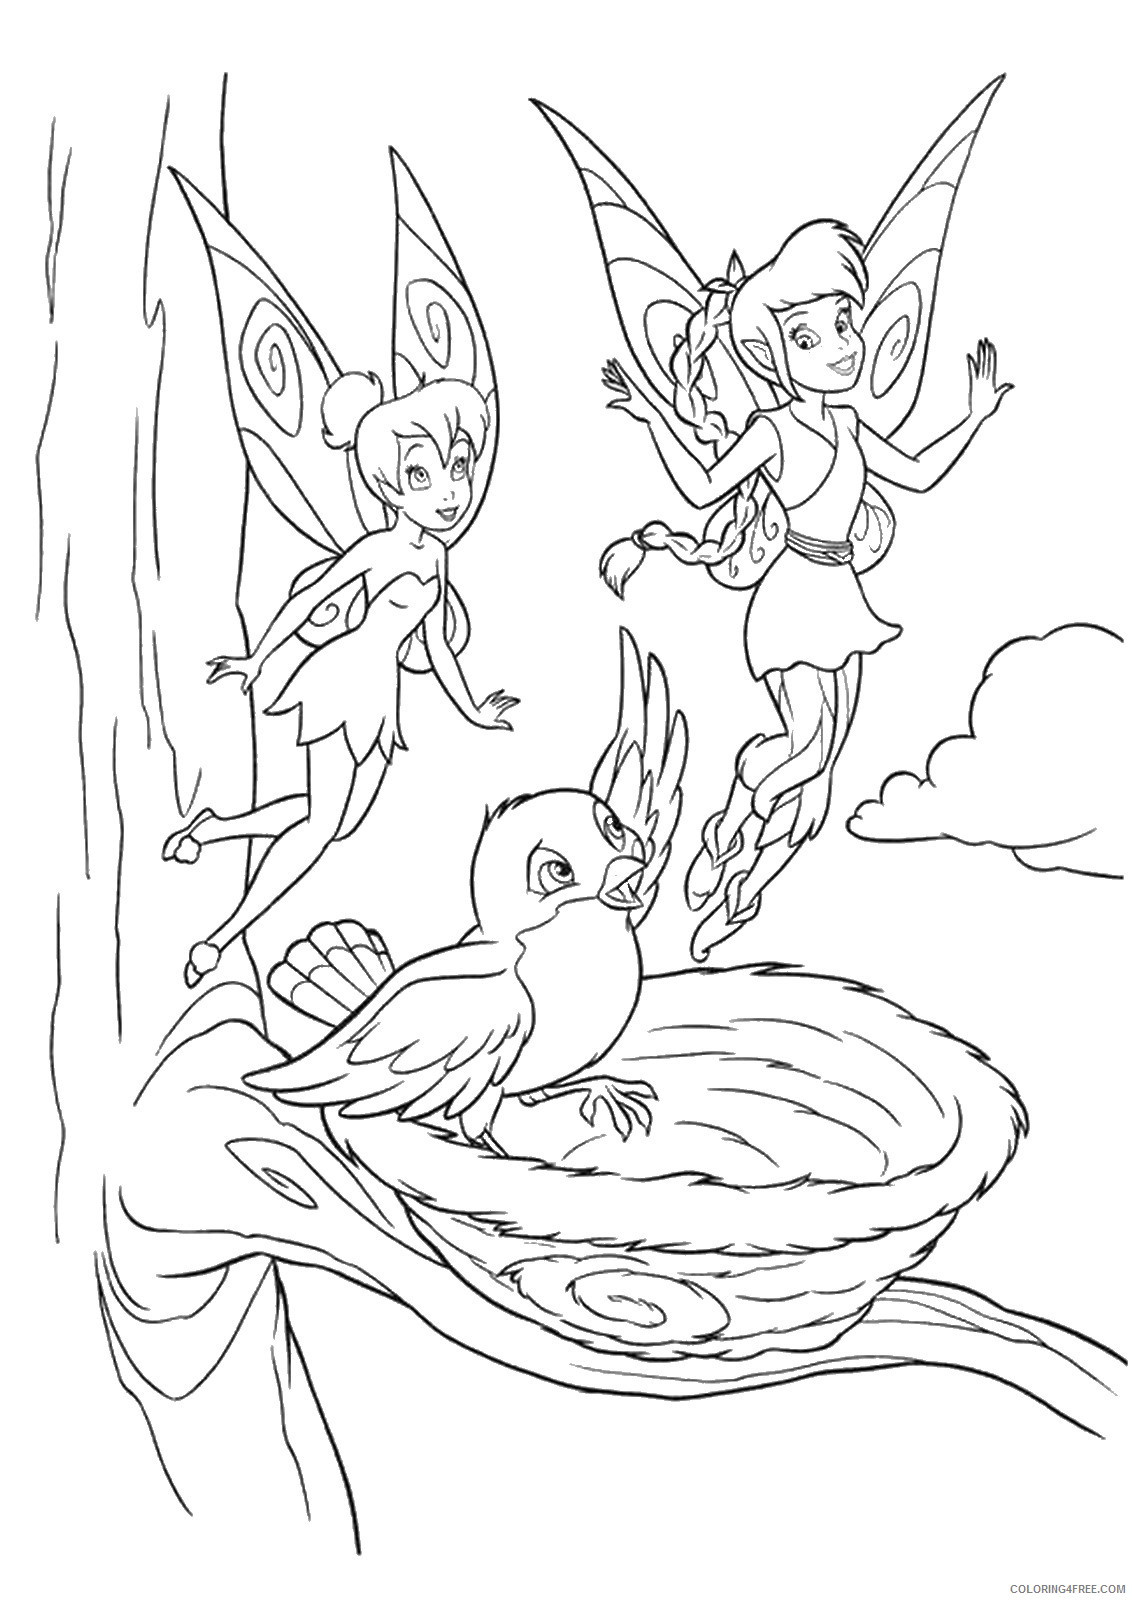 Tinker Bell Coloring Pages Cartoons tinkerbell_cl_34 Printable 2020 6641 Coloring4free